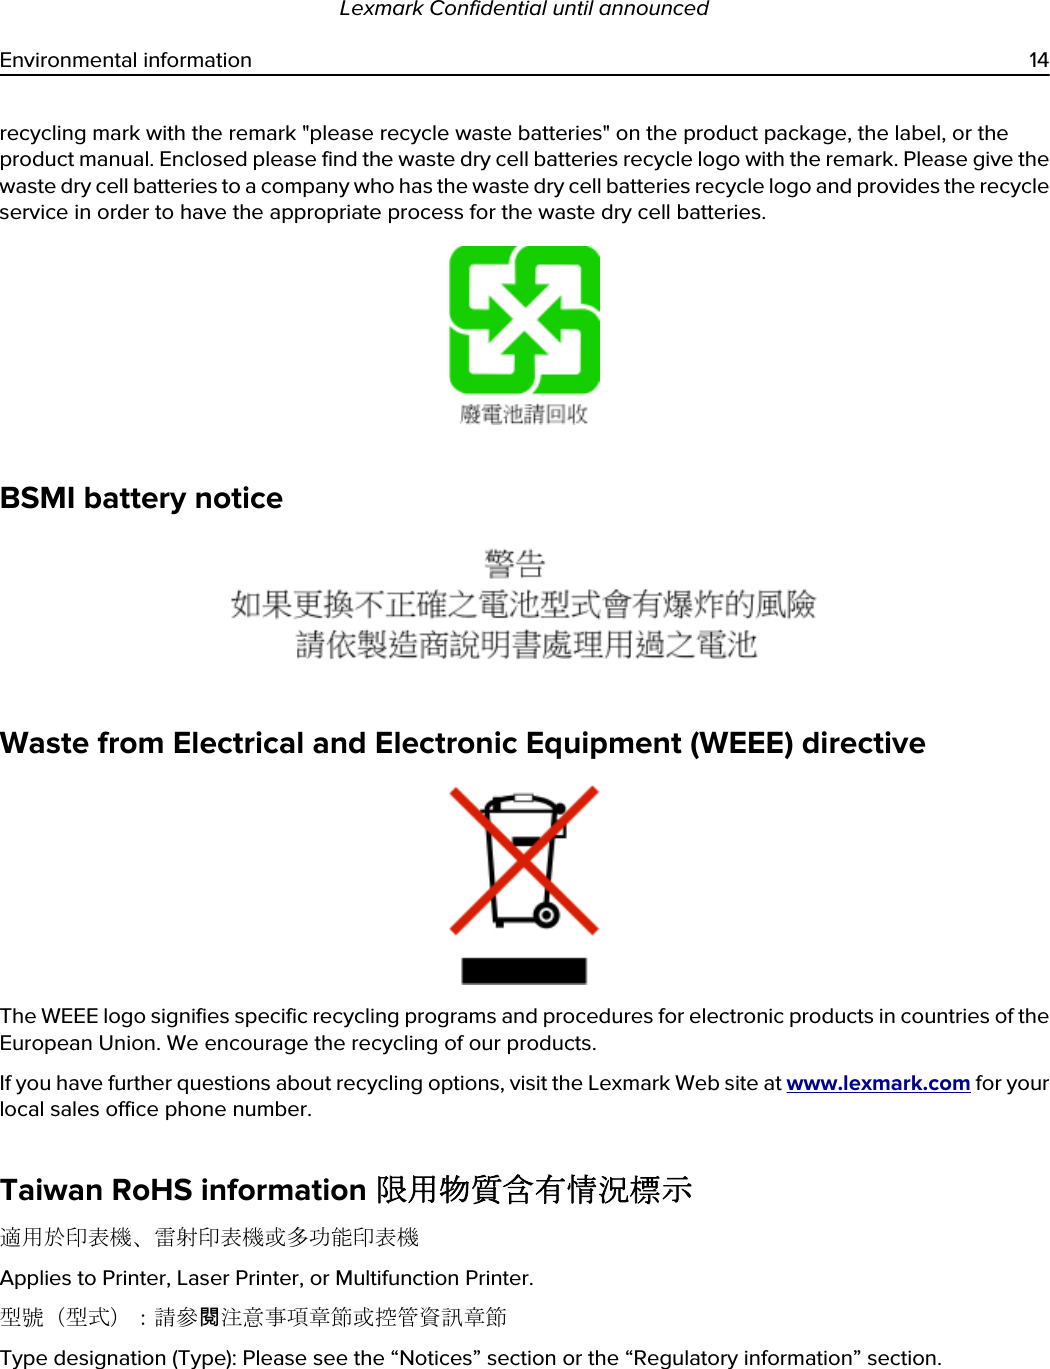 recycling mark with the remark &quot;please recycle waste batteries&quot; on the product package, the label, or the product manual. Enclosed please find the waste dry cell batteries recycle logo with the remark. Please give the waste dry cell batteries to a company who has the waste dry cell batteries recycle logo and provides the recycle service in order to have the appropriate process for the waste dry cell batteries.BSMI battery noticeWaste from Electrical and Electronic Equipment (WEEE) directiveThe WEEE logo signifies specific recycling programs and procedures for electronic products in countries of the European Union. We encourage the recycling of our products.If you have further questions about recycling options, visit the Lexmark Web site at www.lexmark.com for your local sales office phone number.Taiwan RoHS information 限用物質含有情況標示適用於印表機、雷射印表機或多功能印表機Applies to Printer, Laser Printer, or Multifunction Printer.型號（型式）：請參閱注意事項章節或控管資訊章節Type designation (Type): Please see the “Notices” section or the “Regulatory information” section.Lexmark Confidential until announcedEnvironmental information 14